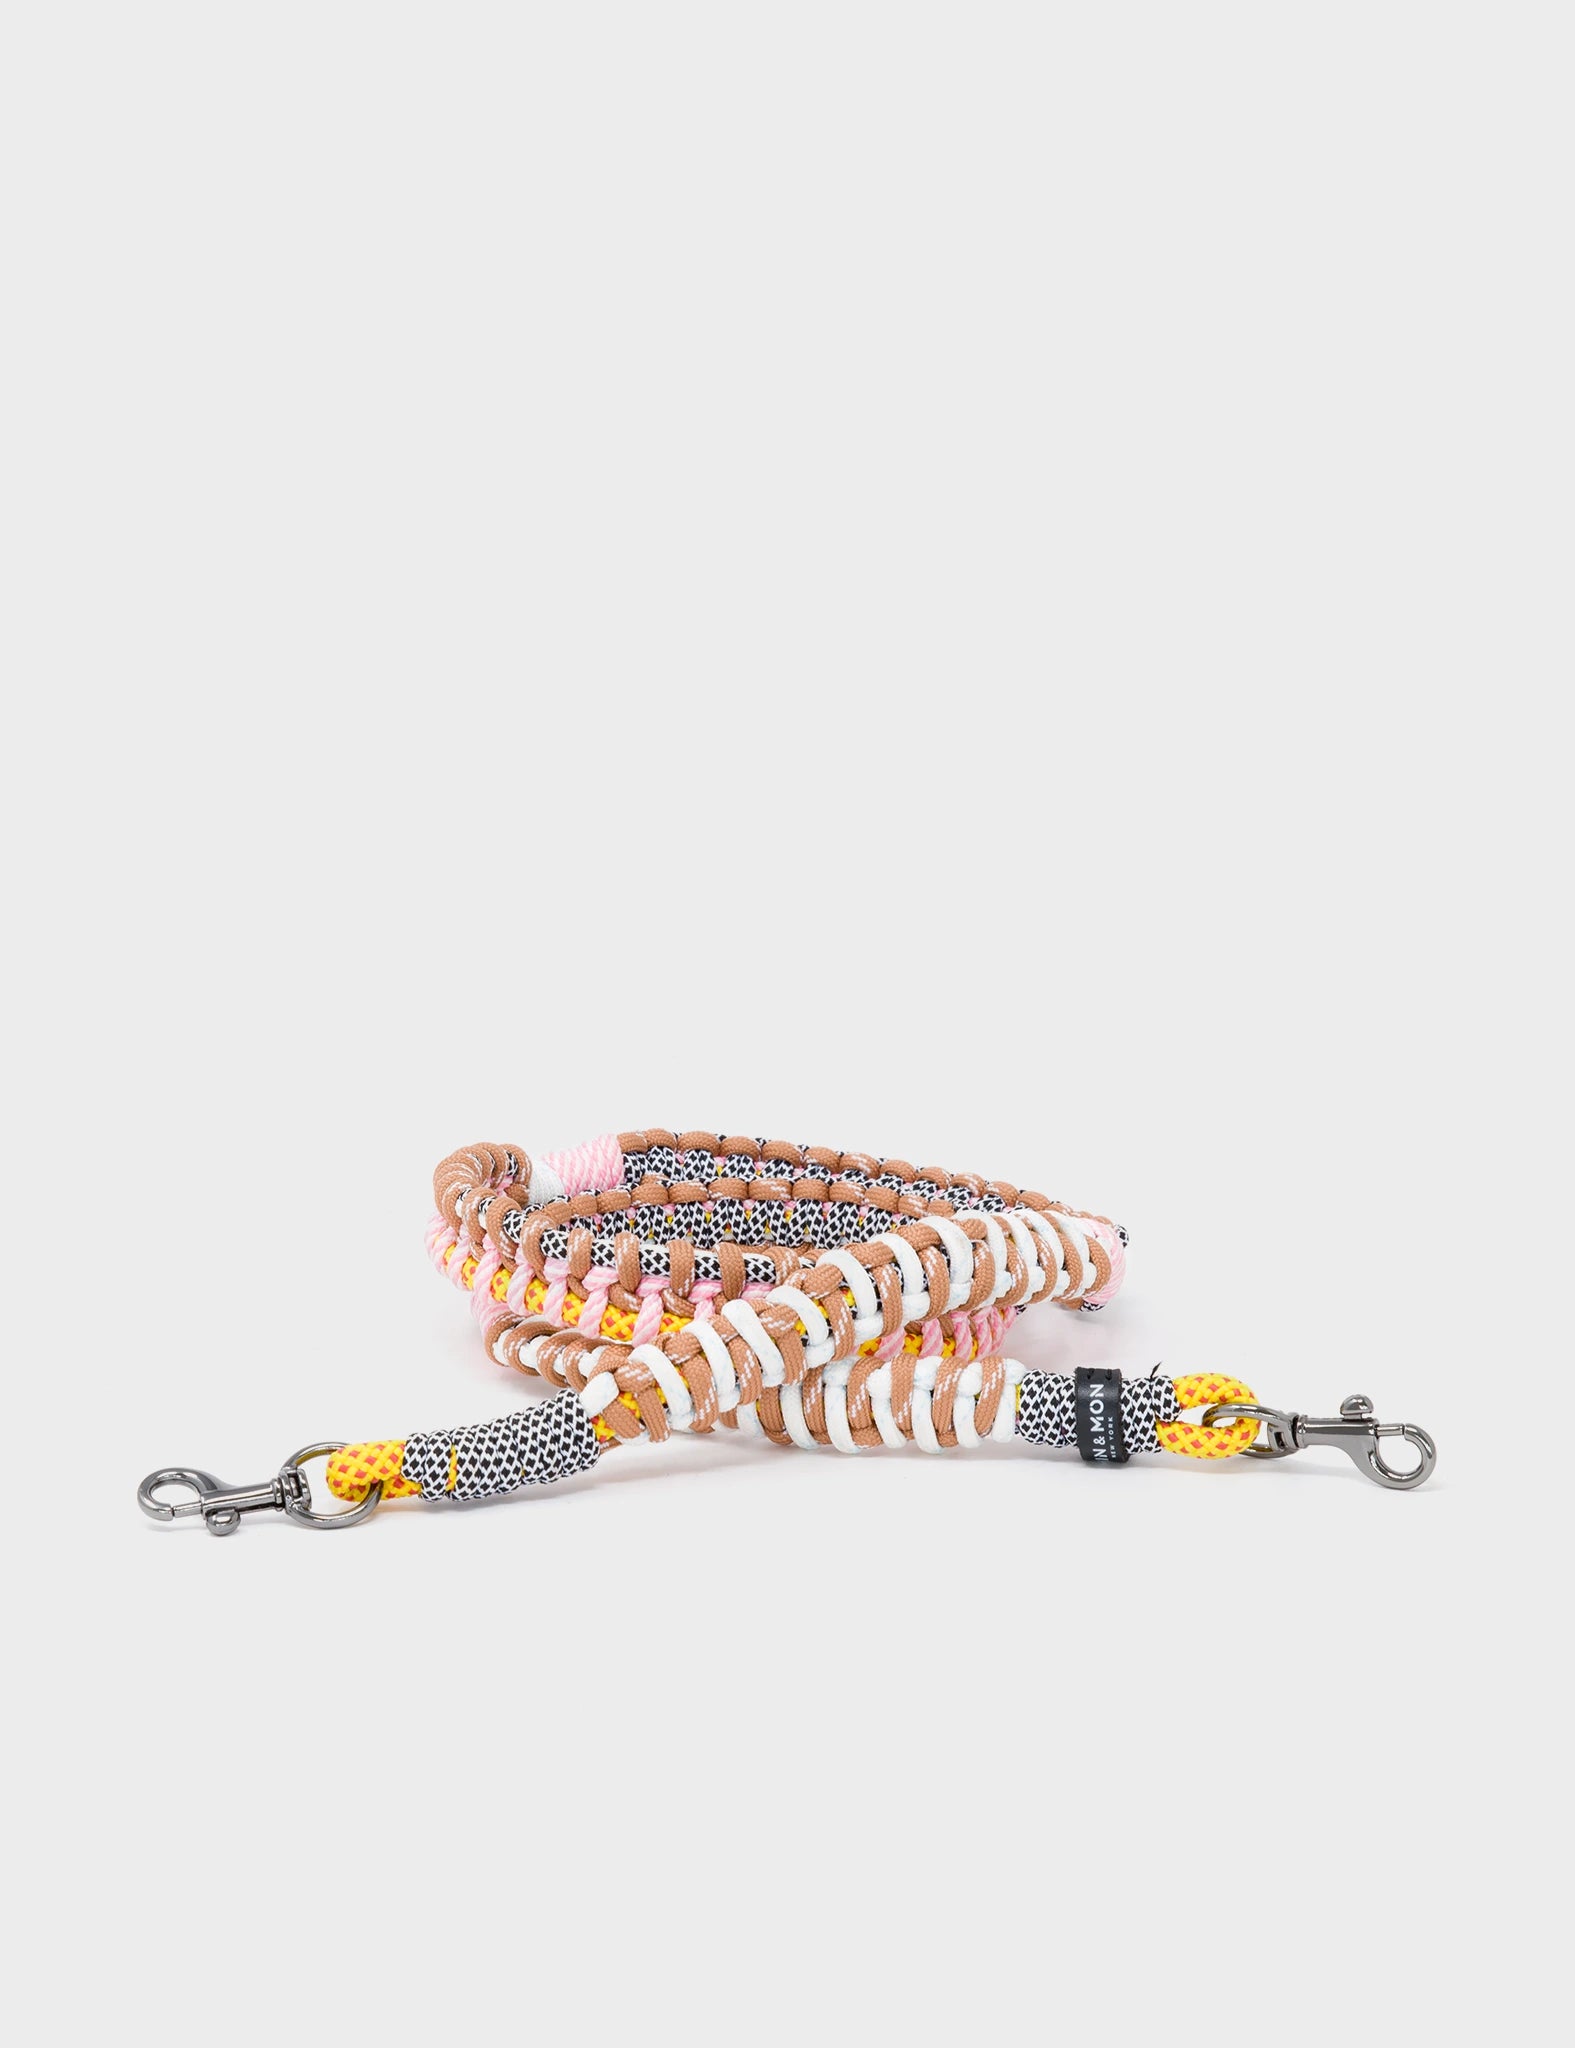 Detachable Shoulder Strap - Pink and Gray Paracord - Detail 